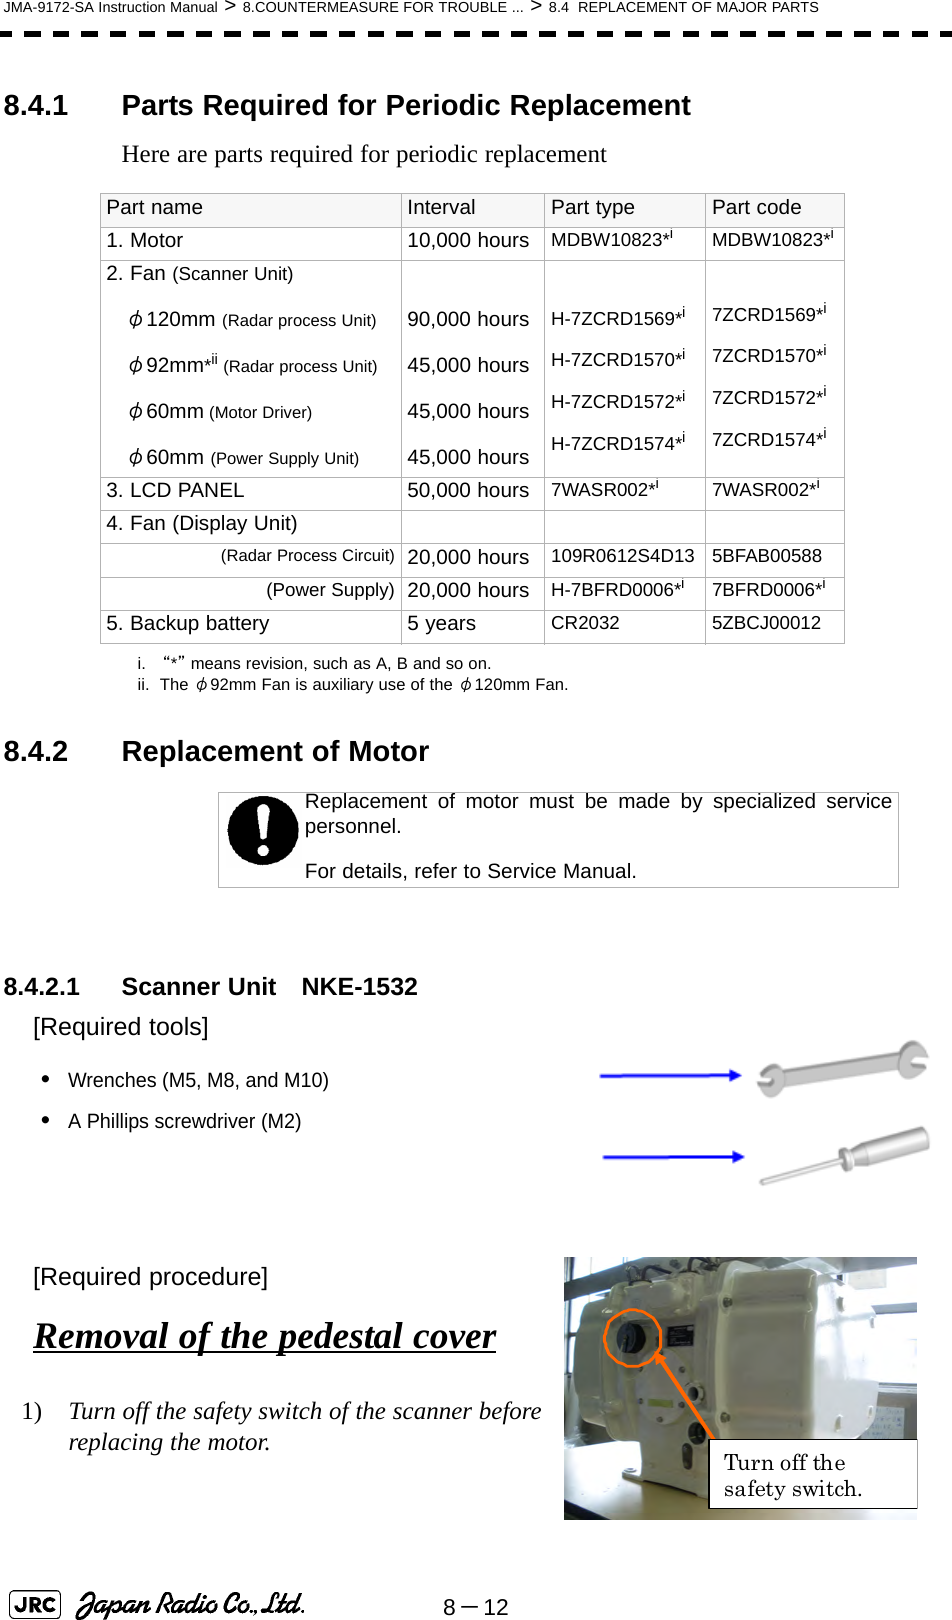 8－12JMA-9172-SA Instruction Manual &gt; 8.COUNTERMEASURE FOR TROUBLE ... &gt; 8.4  REPLACEMENT OF MAJOR PARTS8.4.1 Parts Required for Periodic ReplacementHere are parts required for periodic replacement8.4.2 Replacement of Motor8.4.2.1 Scanner Unit　NKE-1532[Required tools]•Wrenches (M5, M8, and M10)•A Phillips screwdriver (M2)[Required procedure]Removal of the pedestal cover1)  Turn off the safety switch of the scanner before replacing the motor. Part name Interval Part type Part code1. Motor 10,000 hours MDBW10823*ii. “*” means revision, such as A, B and so on.ii.  The φ92mm Fan is auxiliary use of the φ120mm Fan. MDBW10823*i2. Fan (Scanner Unit)   φ120mm (Radar process Unit)   φ92mm*ii (Radar process Unit)   φ60mm (Motor Driver)   φ60mm (Power Supply Unit)90,000 hours45,000 hours45,000 hours45,000 hoursH-7ZCRD1569*iH-7ZCRD1570*iH-7ZCRD1572*iH-7ZCRD1574*i7ZCRD1569*i7ZCRD1570*i7ZCRD1572*i7ZCRD1574*i3. LCD PANEL 50,000 hours 7WASR002*i7WASR002*i4. Fan (Display Unit)(Radar Process Circuit) 20,000 hours 109R0612S4D13 5BFAB00588(Power Supply) 20,000 hours H-7BFRD0006*i7BFRD0006*i5. Backup battery 5 years CR2032 5ZBCJ00012Replacement of motor must be made by specialized servicepersonnel. For details, refer to Service Manual. Turn off the safety switch. 